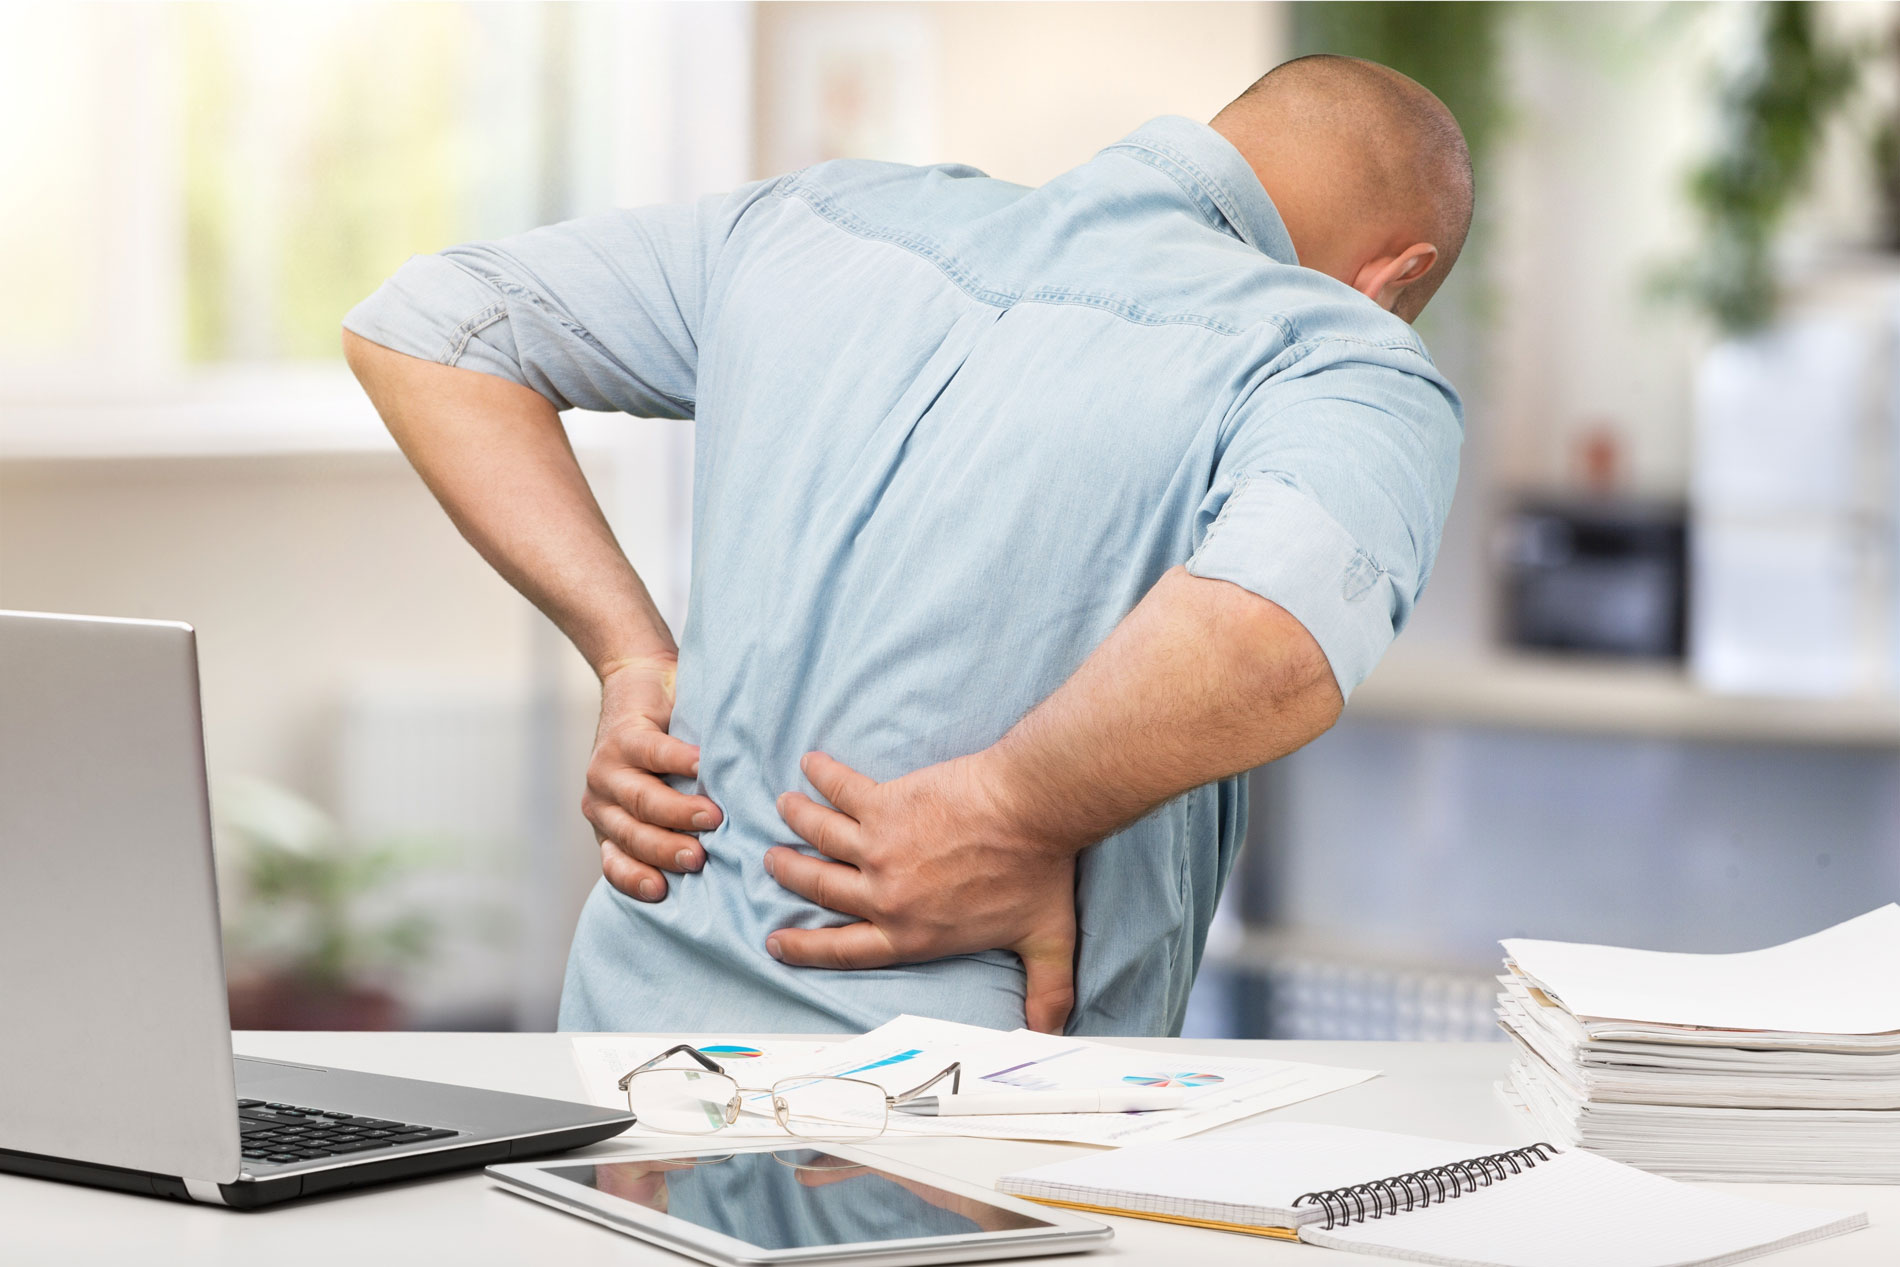 Lower Back Pain Treatment - Physical Therapy for Back Pain